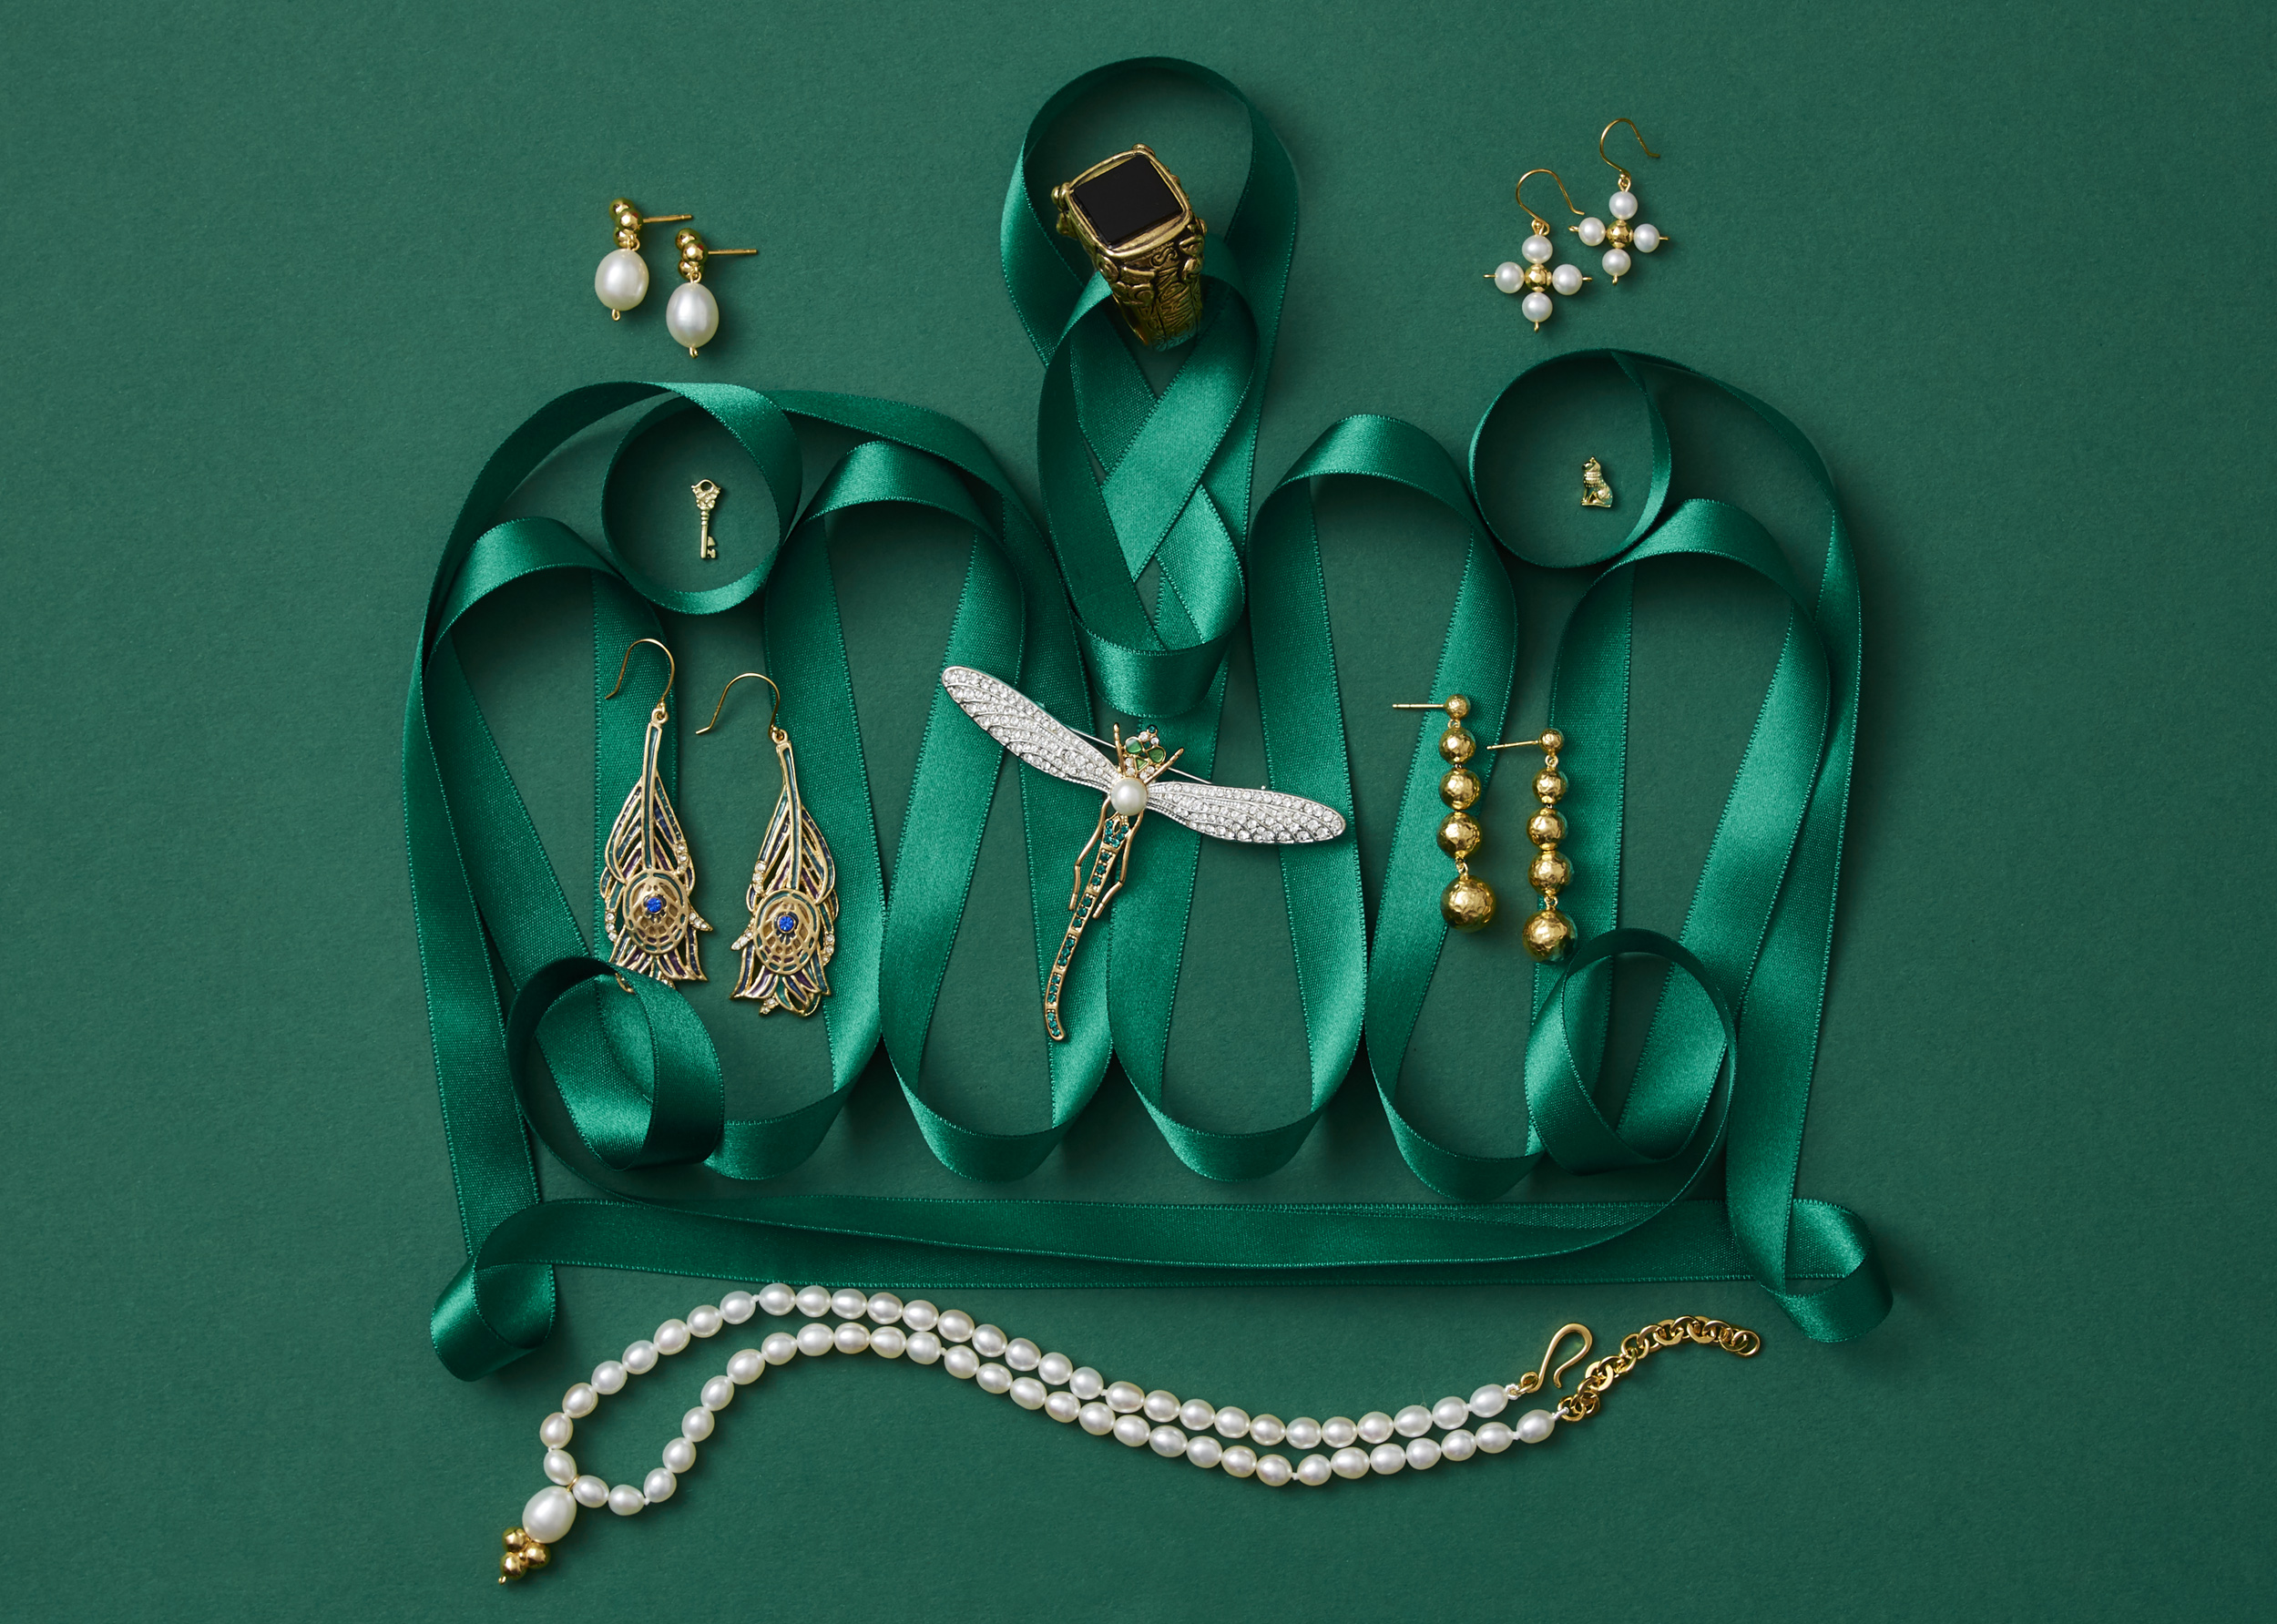 marketing still life photograph of a crown made of green ribbon adorned with gold and pearl jewelry including earrings, a pin, a ring, and a necklace on a green background.